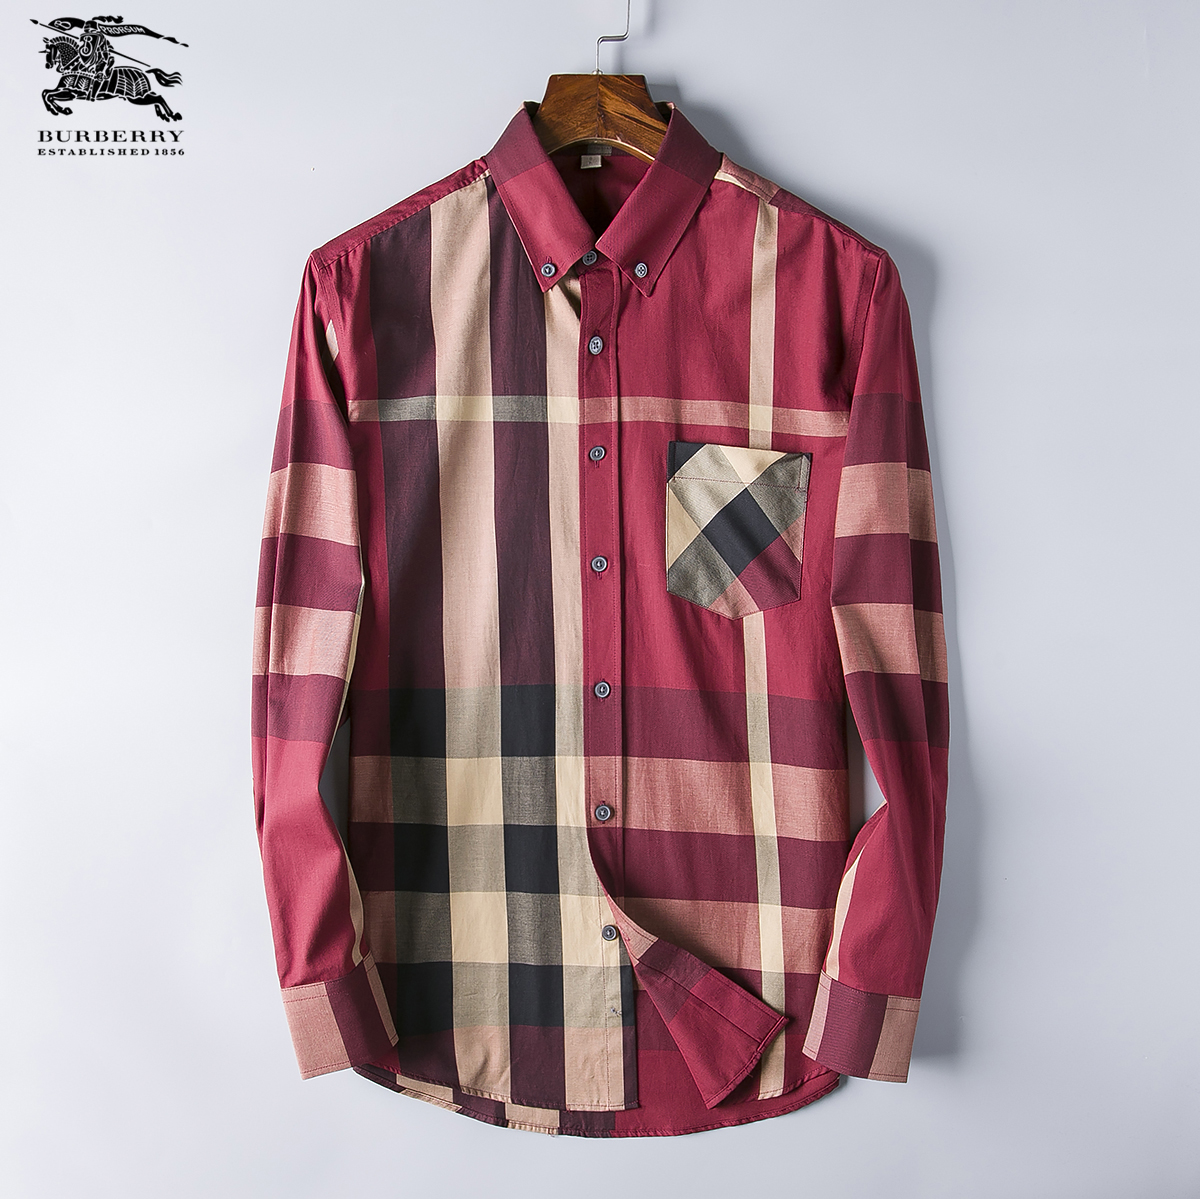 Cheap 2018 New Cheap Burberry Long Sleeved Shirts For Men in 195179,$28 ...